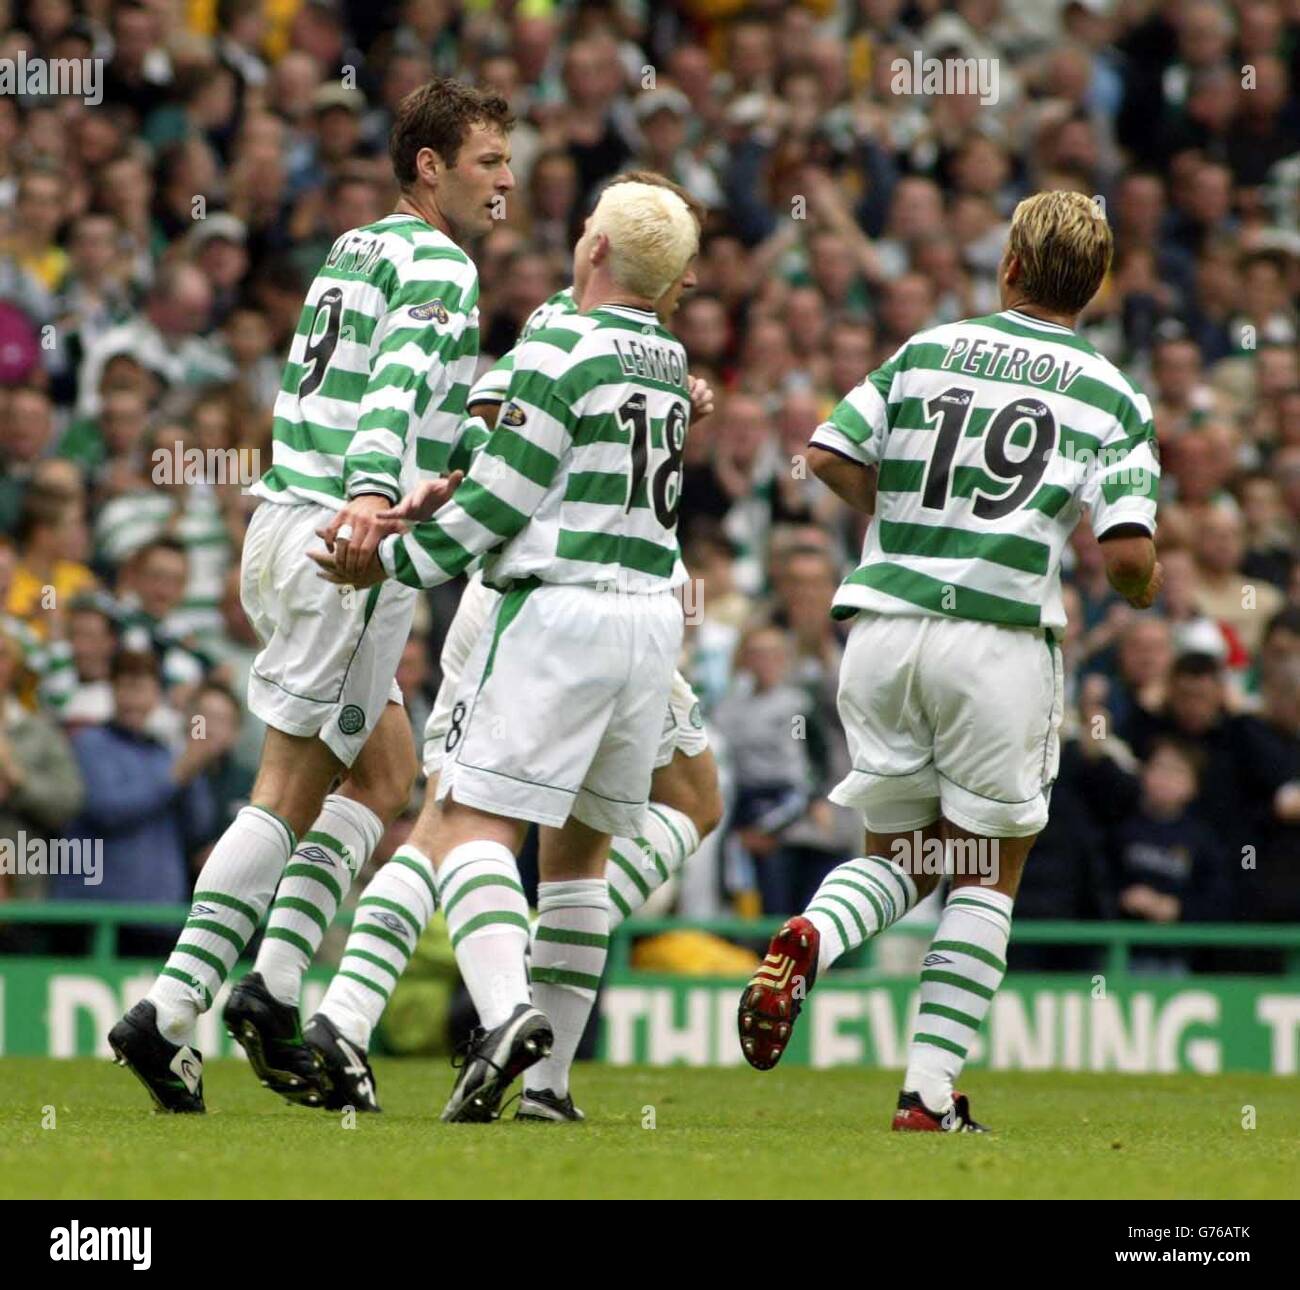 Celtic's Chris Sutton (far left) is congratulated by team mates after scoring against Kilmarnock, during their Bank of Scotland Premier League match at Celtic Park. Stock Photo